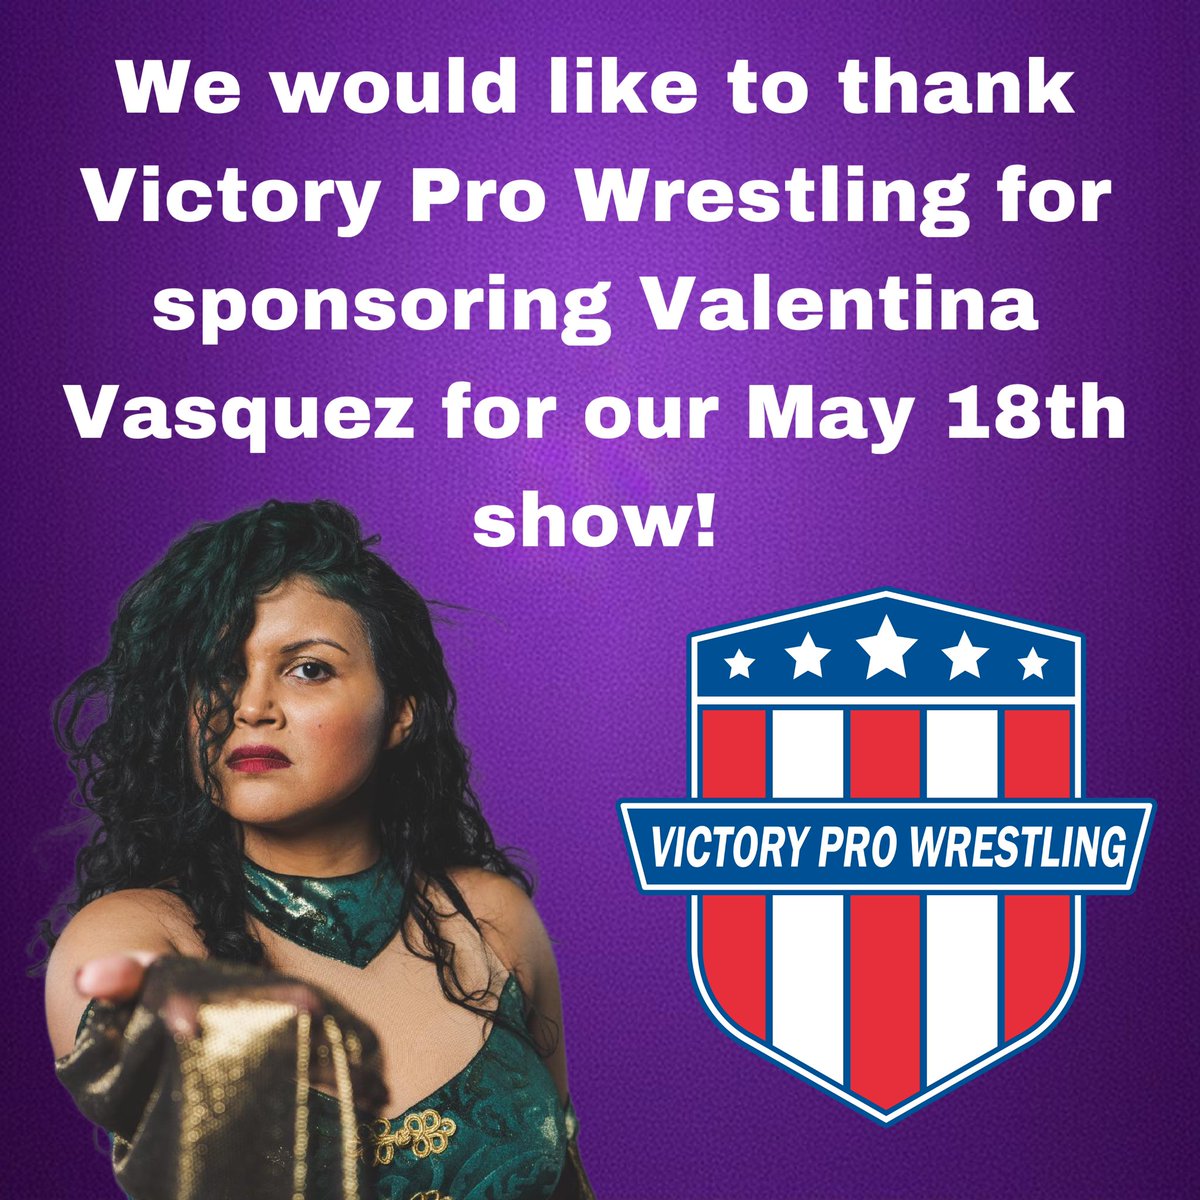 Thank you Victory Pro Wrestling for sponsoring Valentina Vasquez for our May 18th